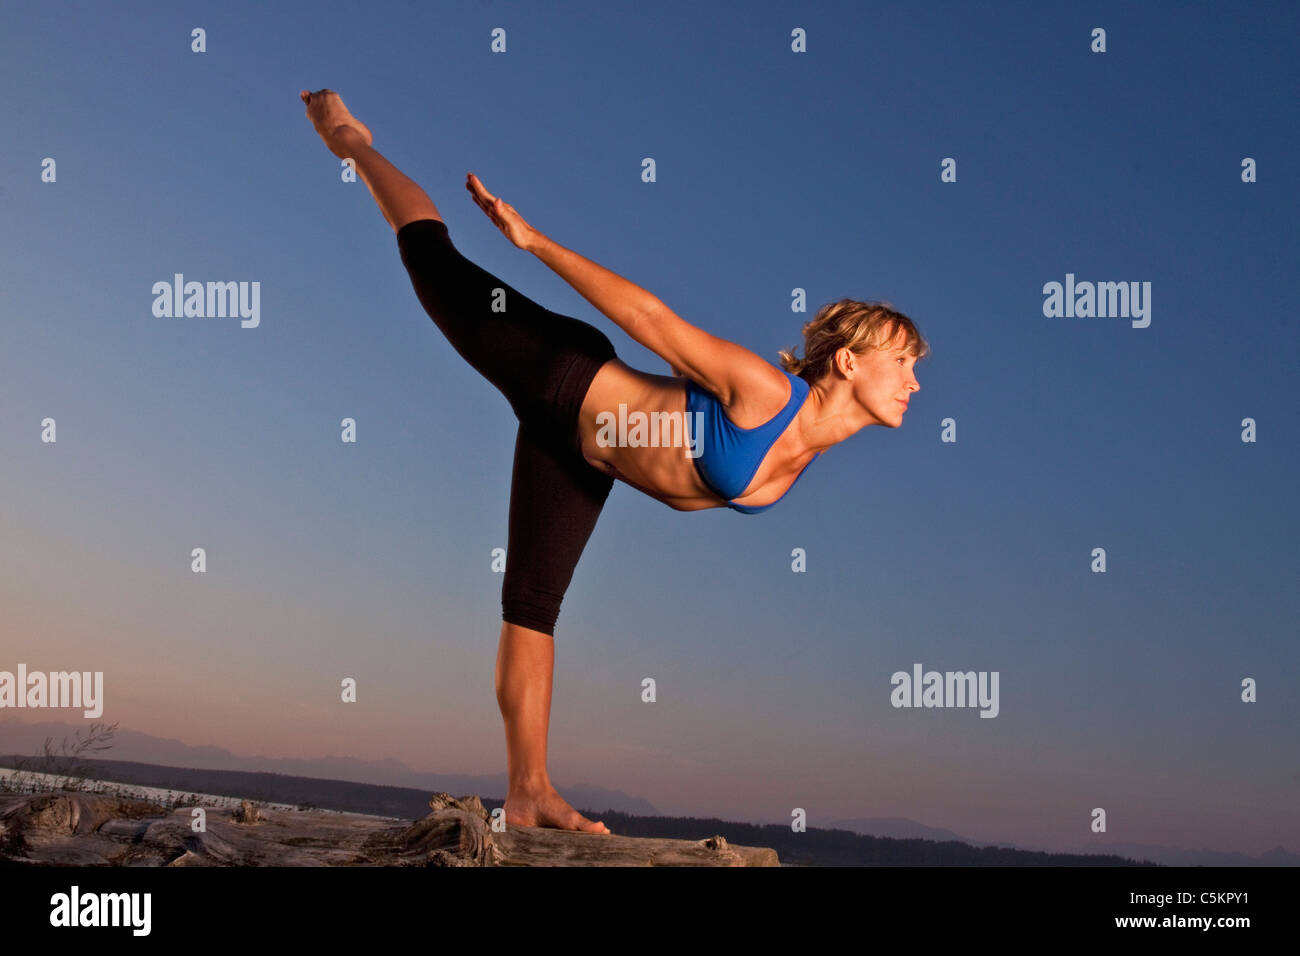 Balancing Stick Pose. Tuladandasana. Side View Of Woman Silhouette Doing  Yoga Outdoor At Morning Stock Photo, Picture and Royalty Free Image. Image  190680518.